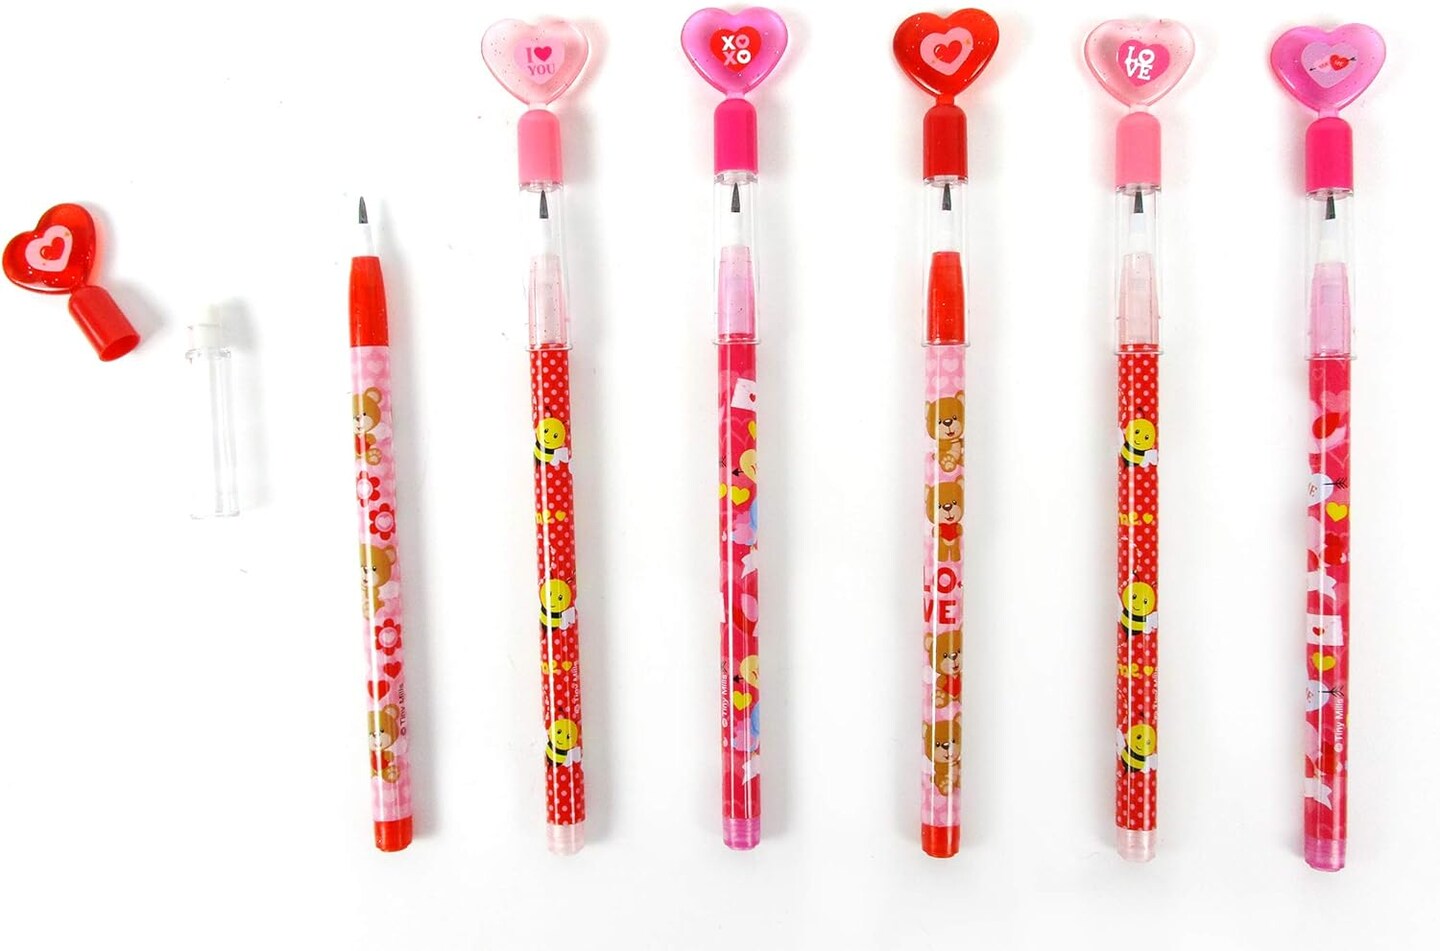 TINYMILLS 24 Pcs Valentine&#x27;s Day Heart Multi Point Pencils Party Favors Goodie Bag Stuffers Carnival Prize Classroom Exchange Valentine&#x27;s Day Pencils